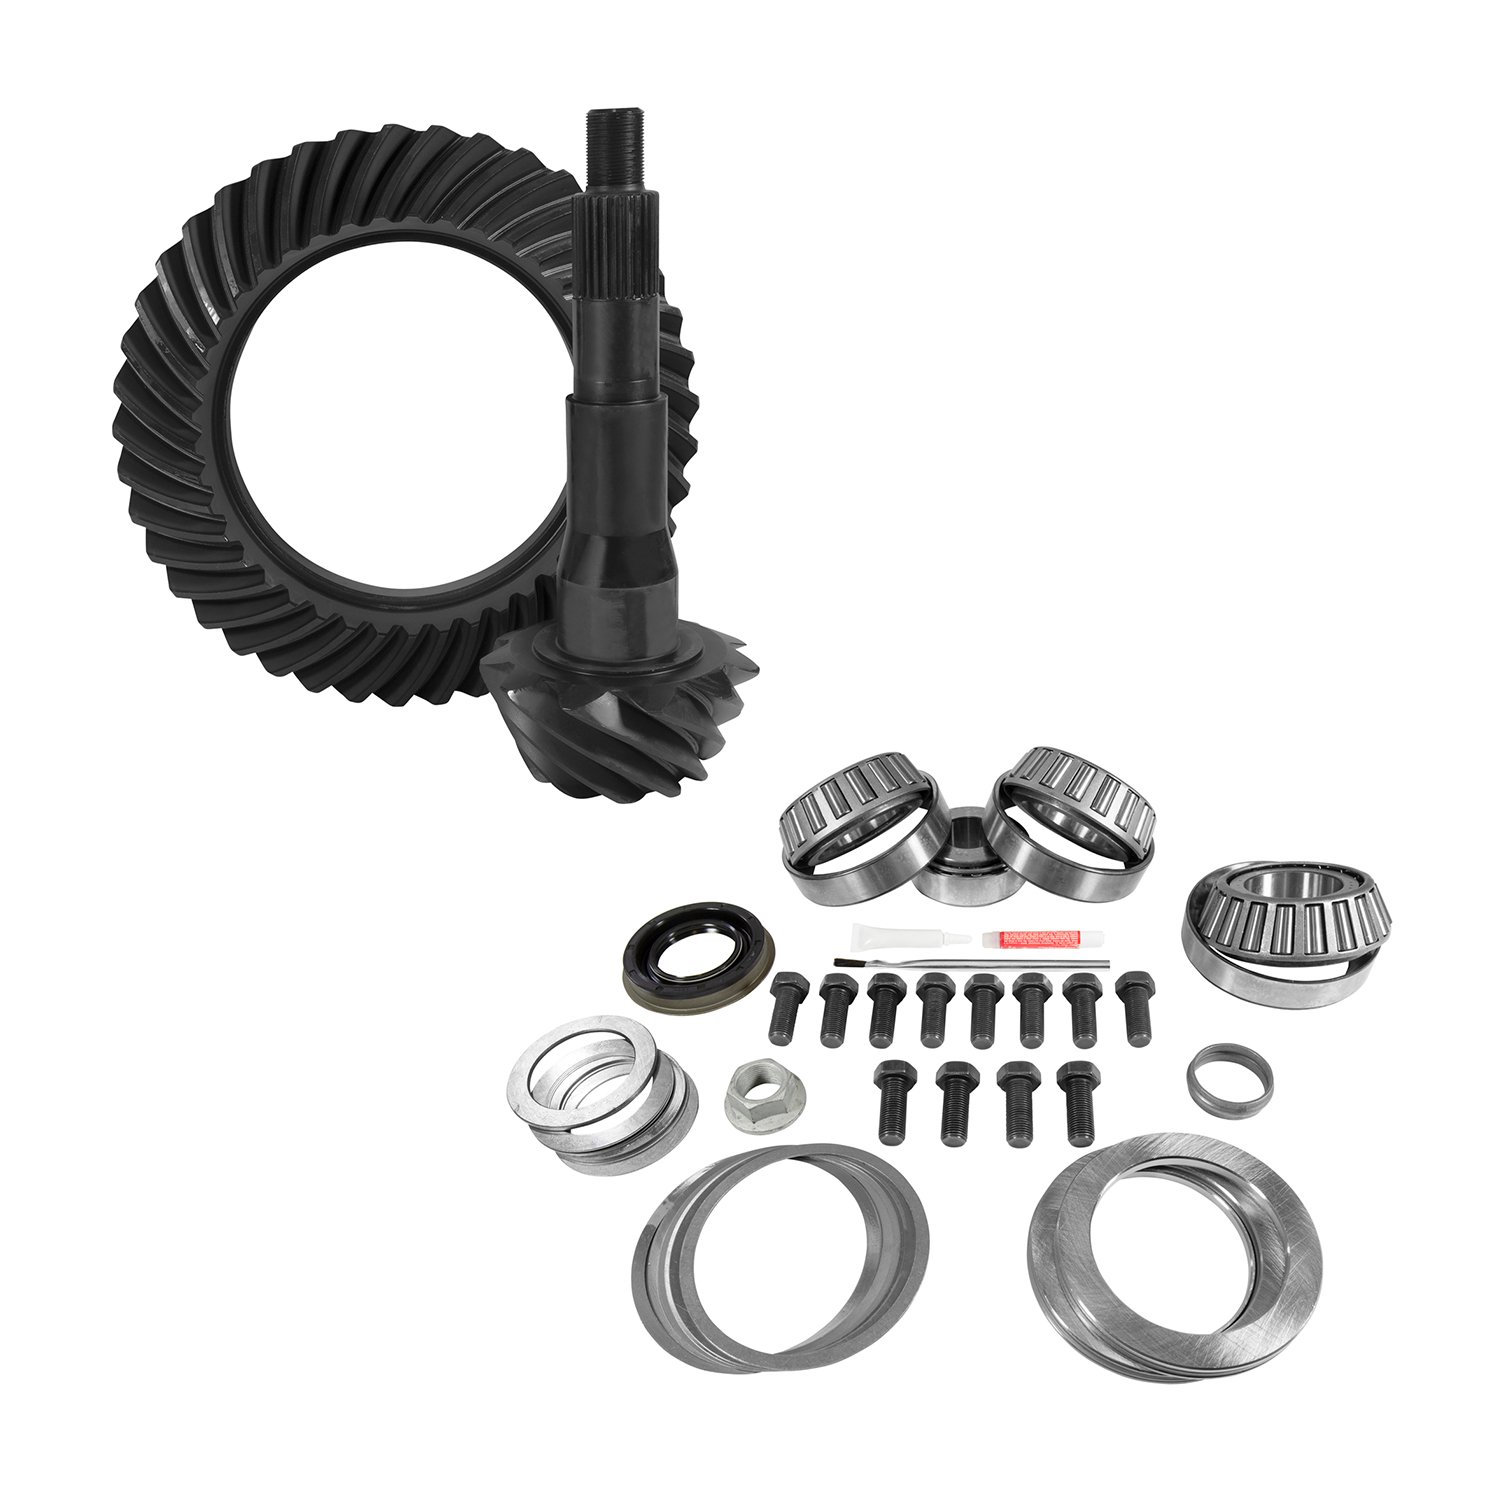 USA Standard 10847 Ring & Pinion And Install Kit, 10.5 in. Ford, 4.56 Rear